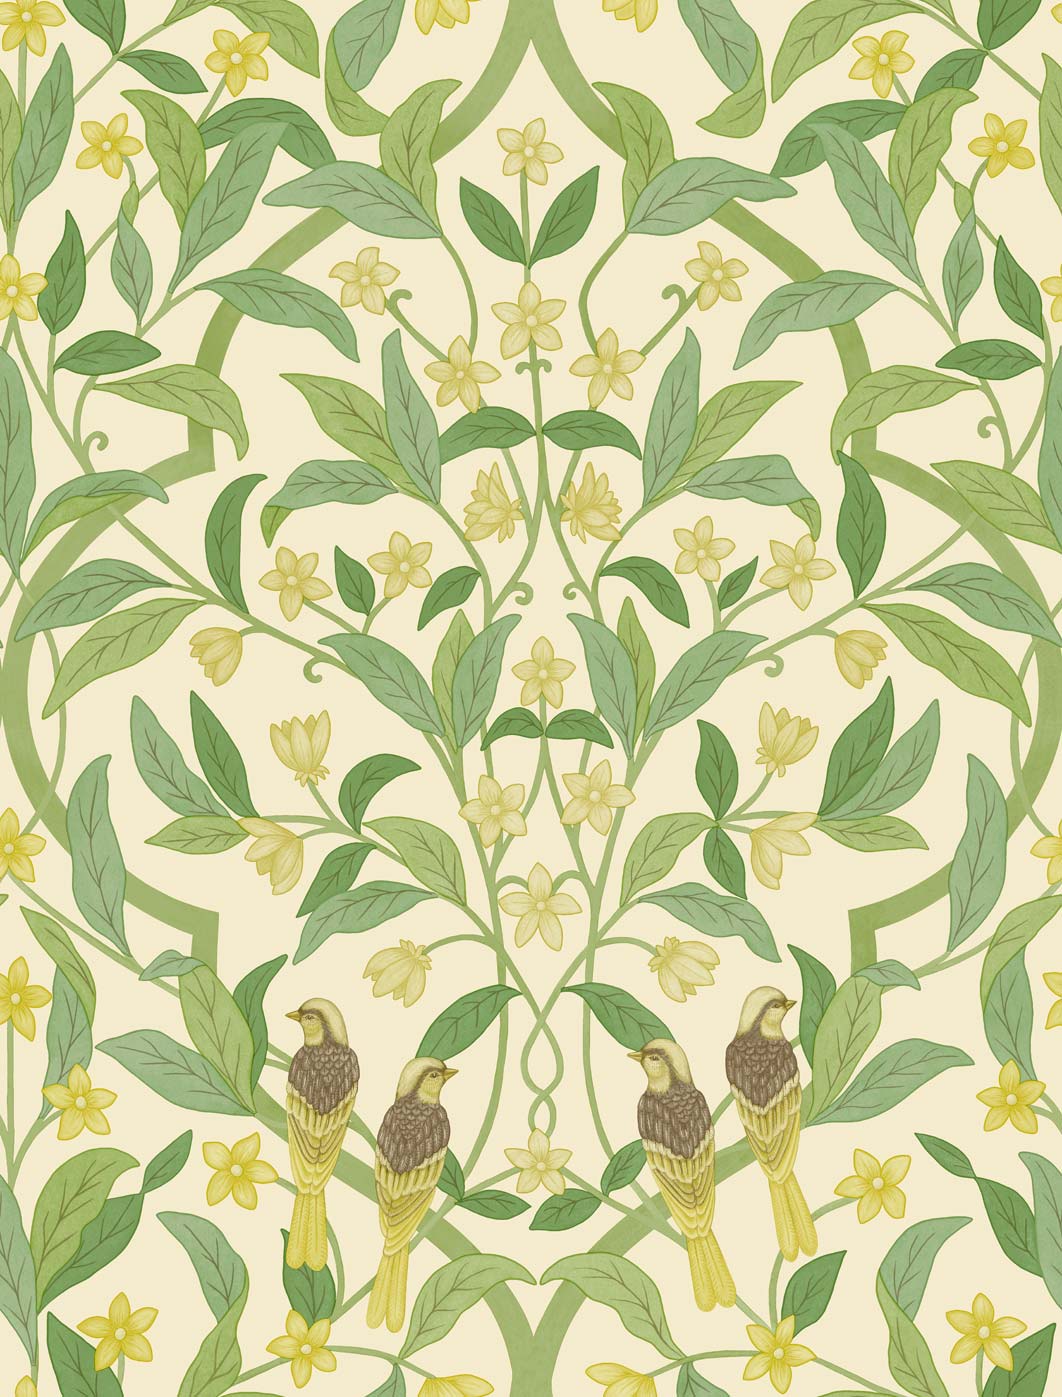 Jasmine & Serin Symphony - Chartreuse & Olive Green on White - Wallpaper Trader